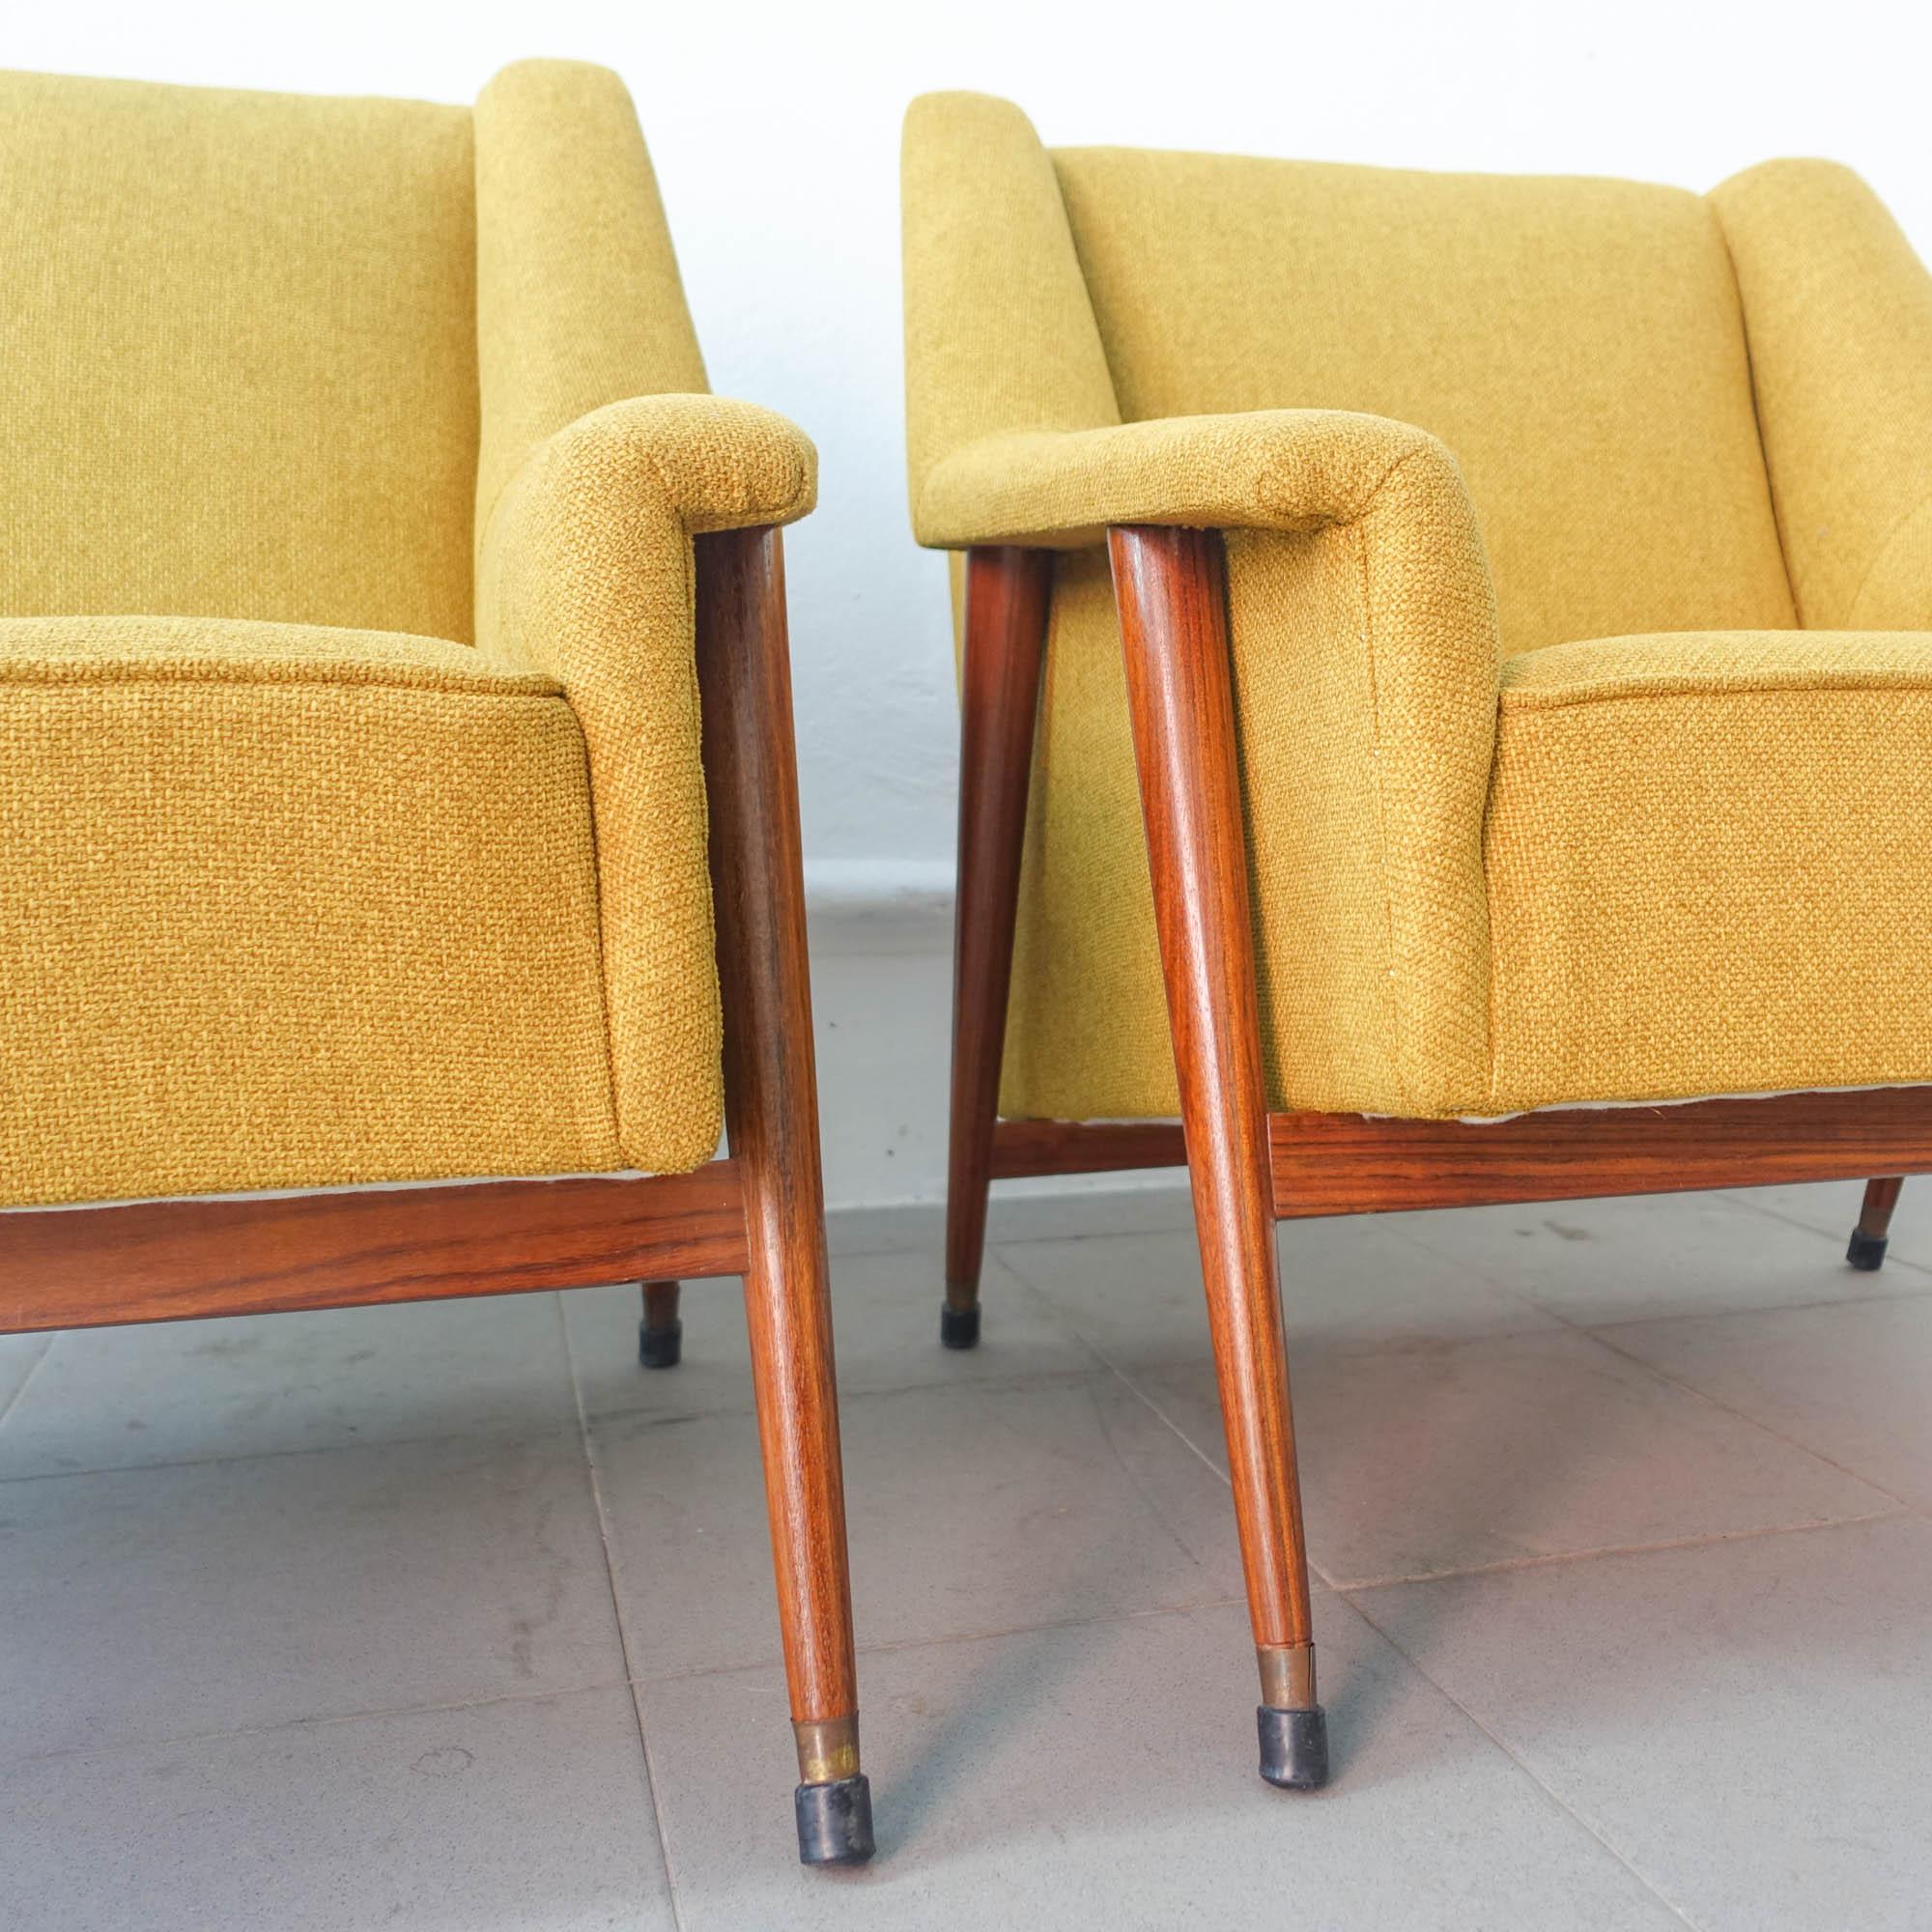 Pair of Easy Chairs, by José Espinho for Olaio, 1959 For Sale 8